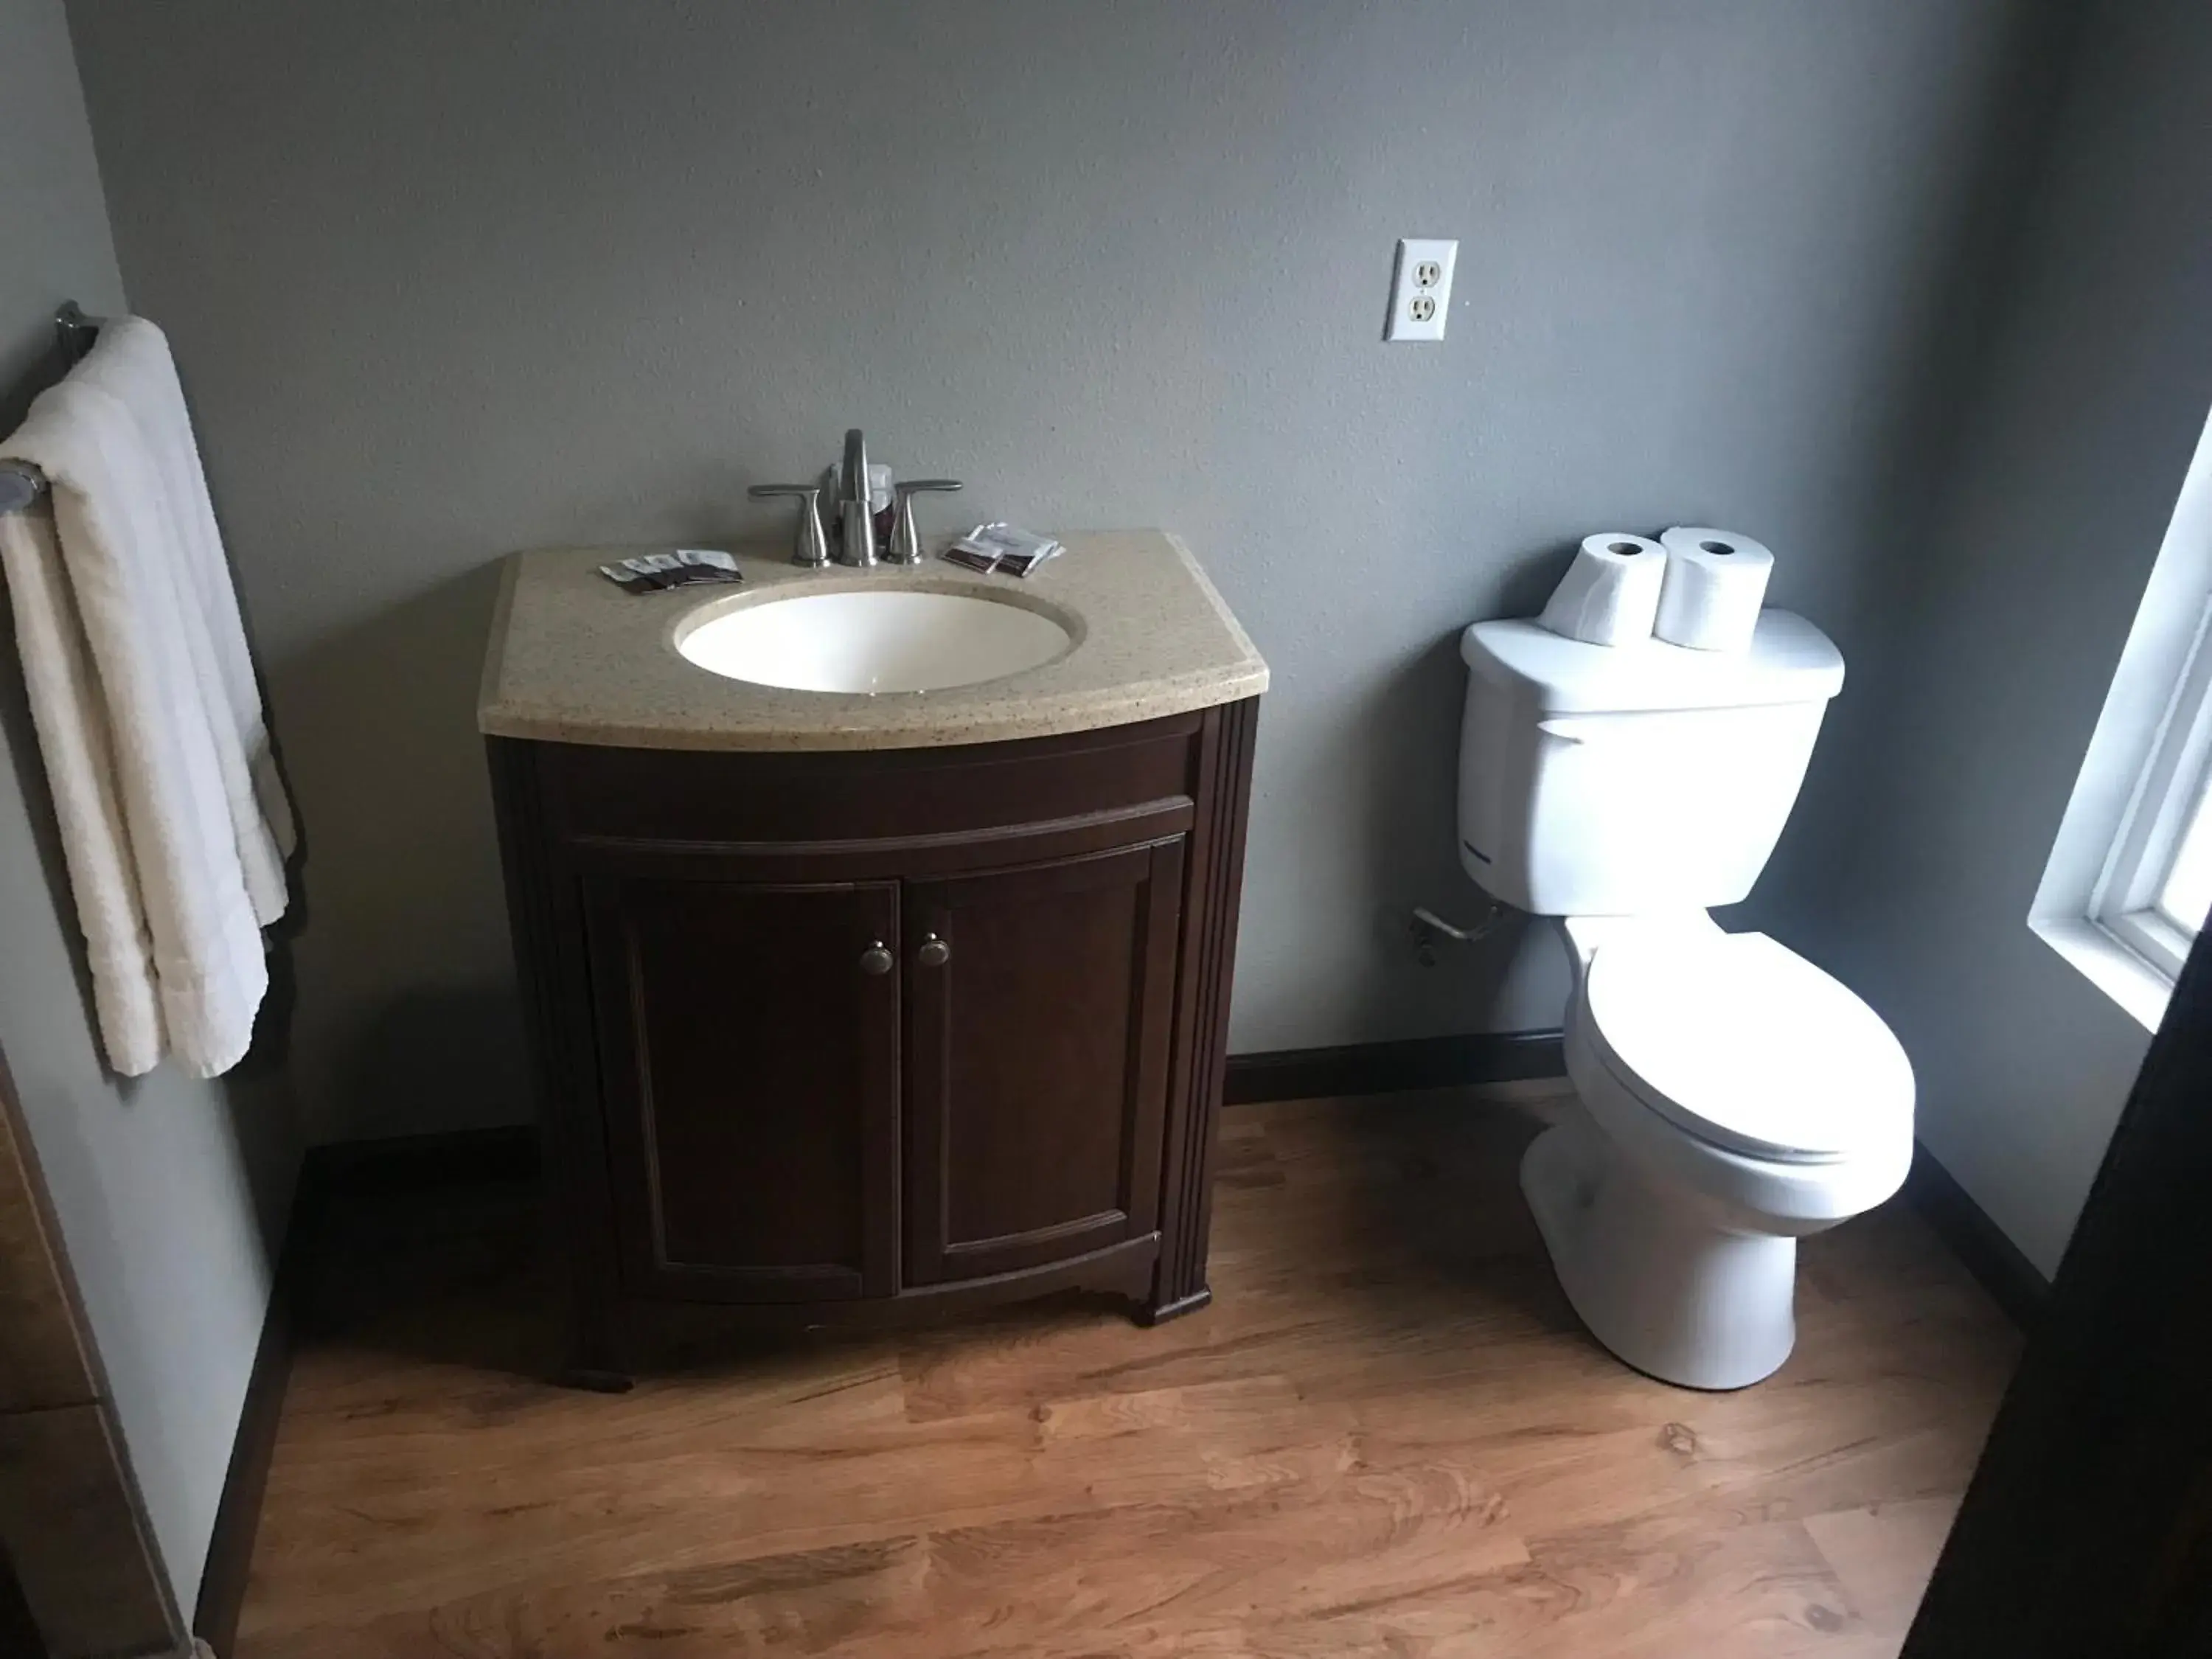 Bathroom in Mountain Trail Lodge and Vacation Rentals